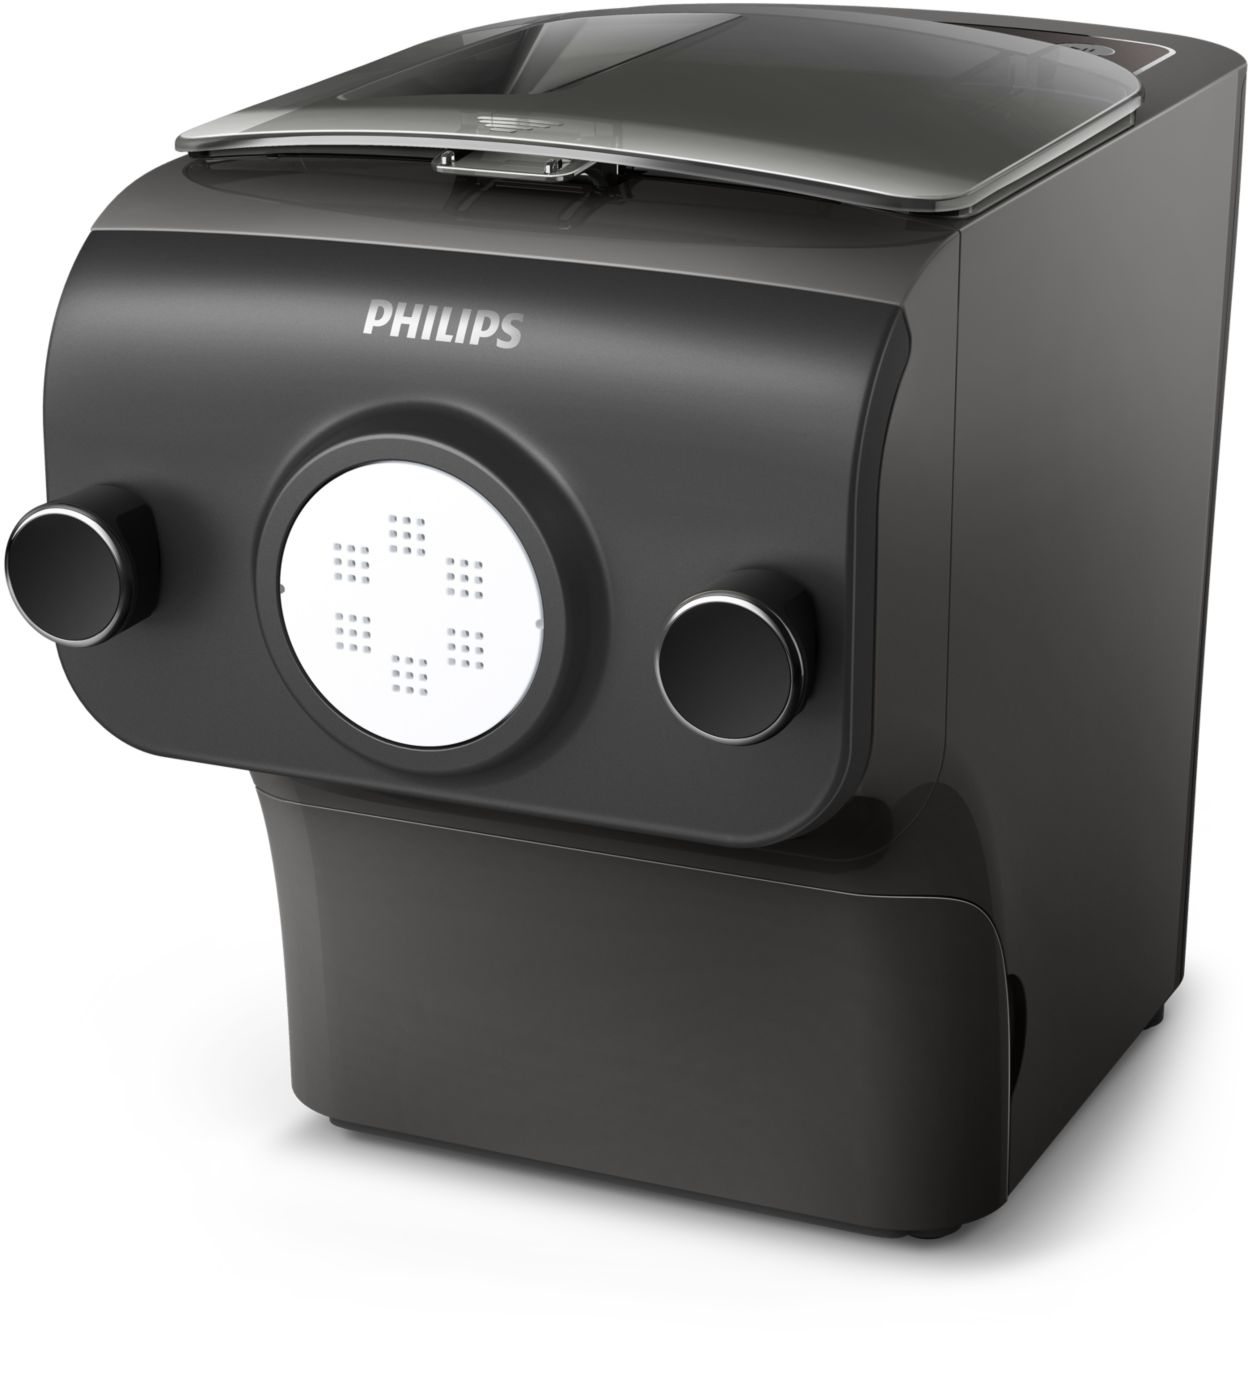 Philips Pasta And Noodle Maker – Grow It, Catch It, Cook It